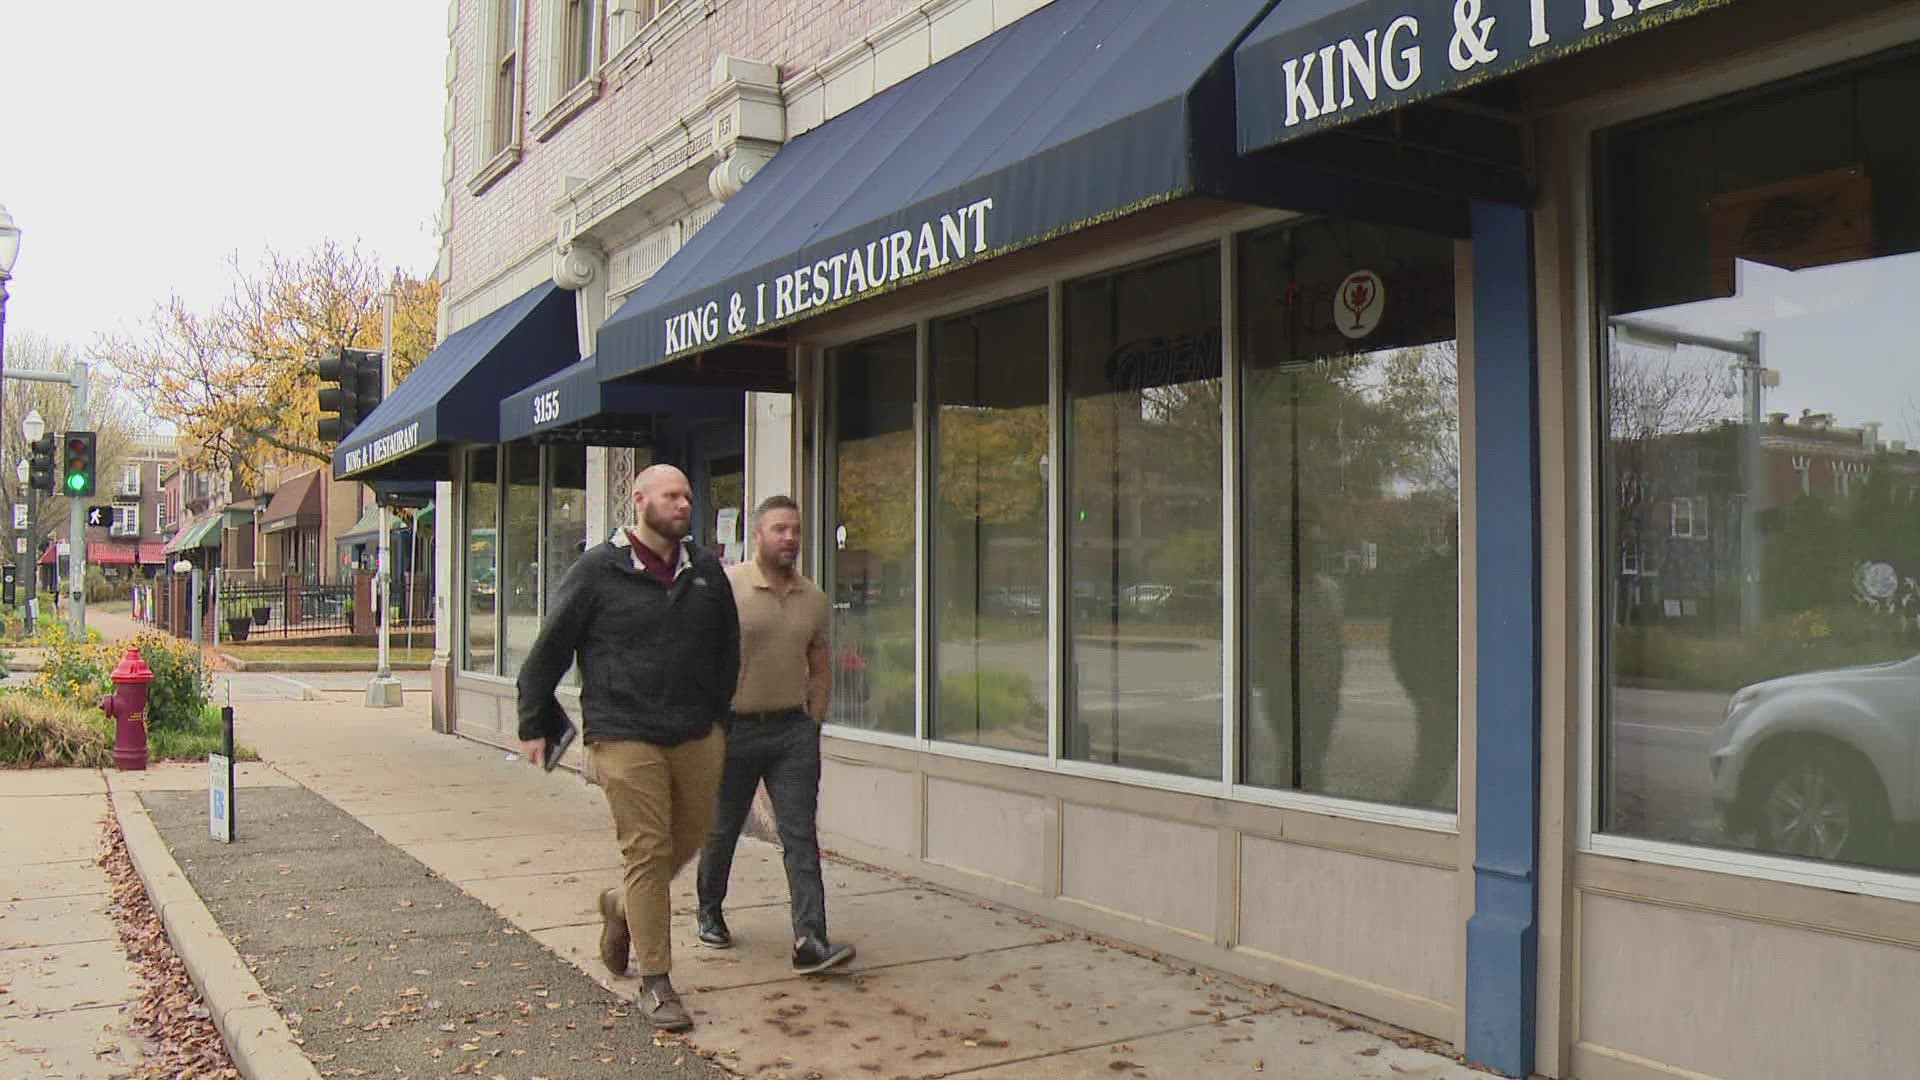 King and I has been nestled on South Grand near Juniata Street since 1993, making it the first local Thai restaurant.